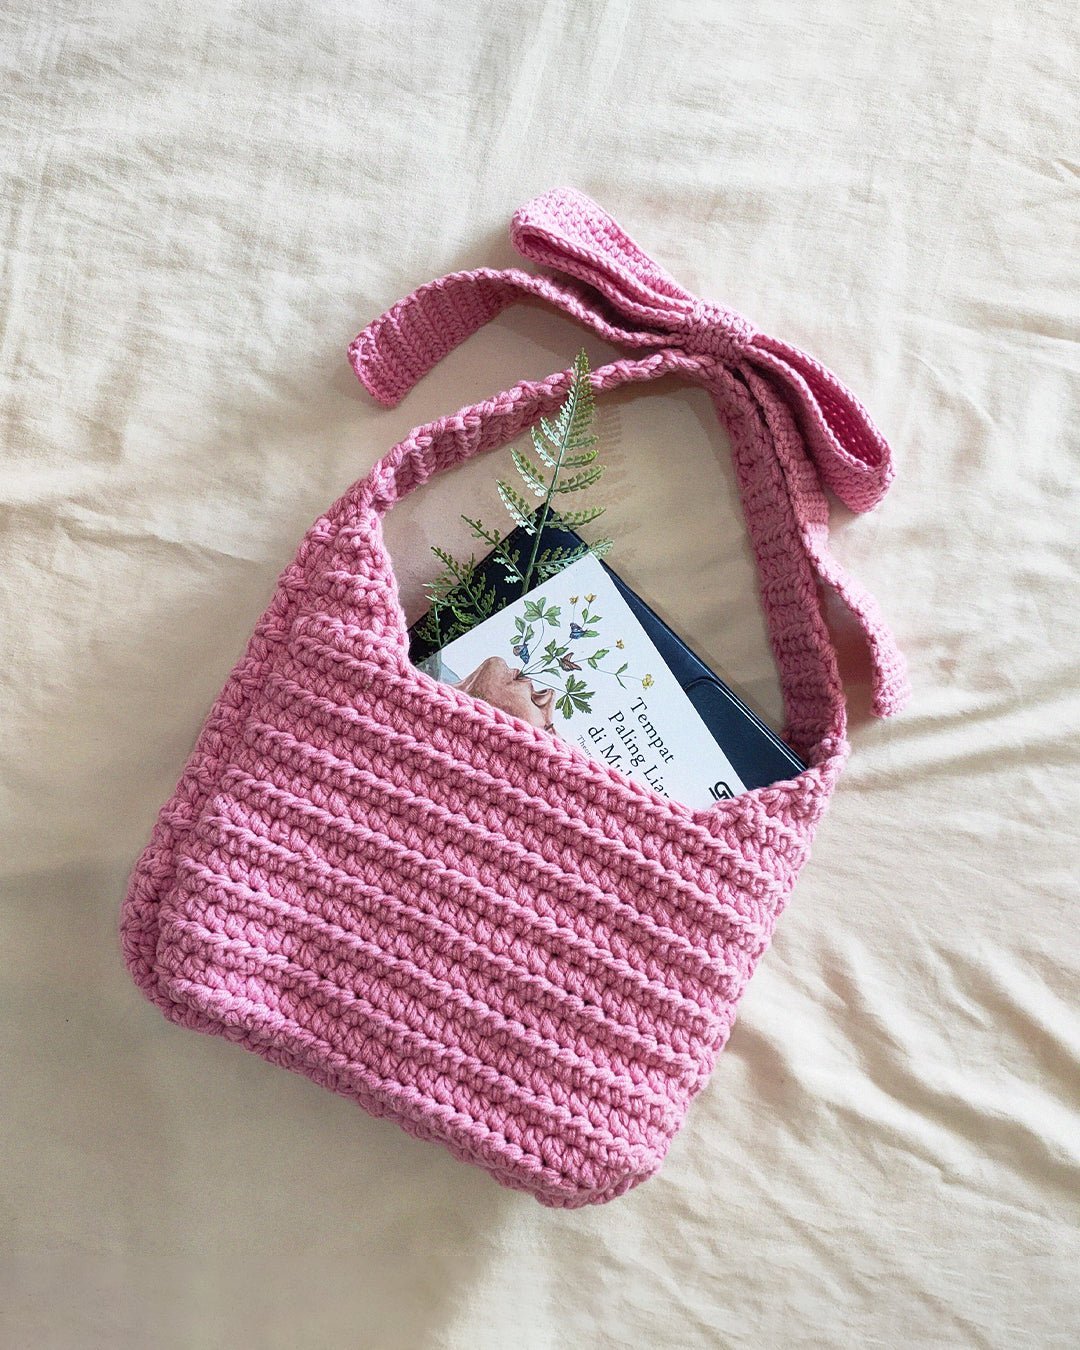 Big Bow bag ✧ Custom Handmade ✧ Designed and crocheted by devout hand